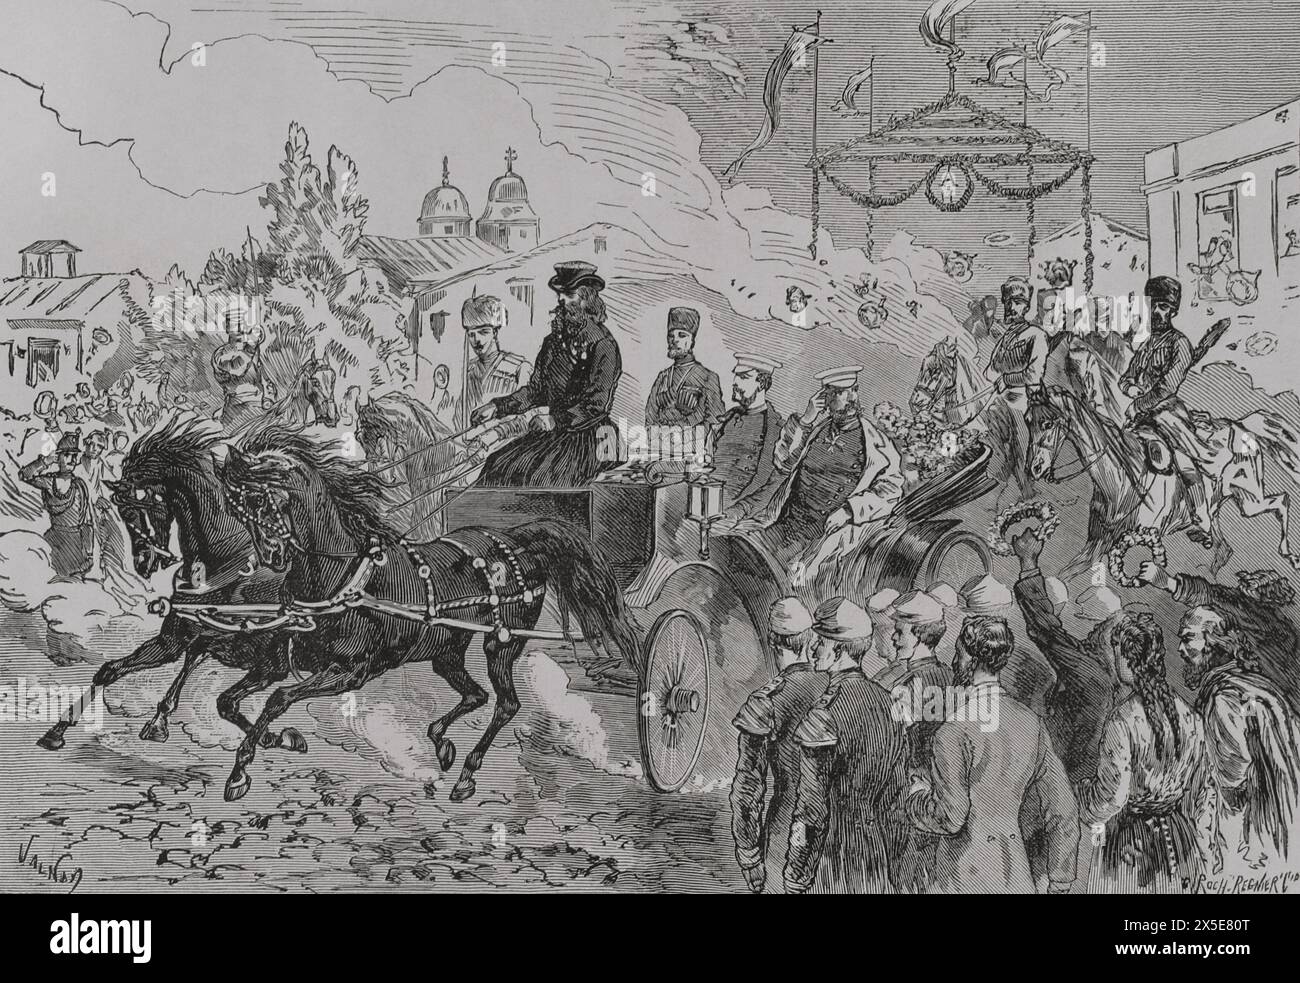 Russo-Turkish War (1877-1878). Entry of Tsar Alexander II of Russia (1818-1881) into Ploiesti (Romania). The Russian army corps cantoned at Kischeneff was the one that entered Romania for crossing the Danube. Engraving. 'La Guerra de Oriente' (The Russo-Turkish War). Volume I. 1877. Stock Photo